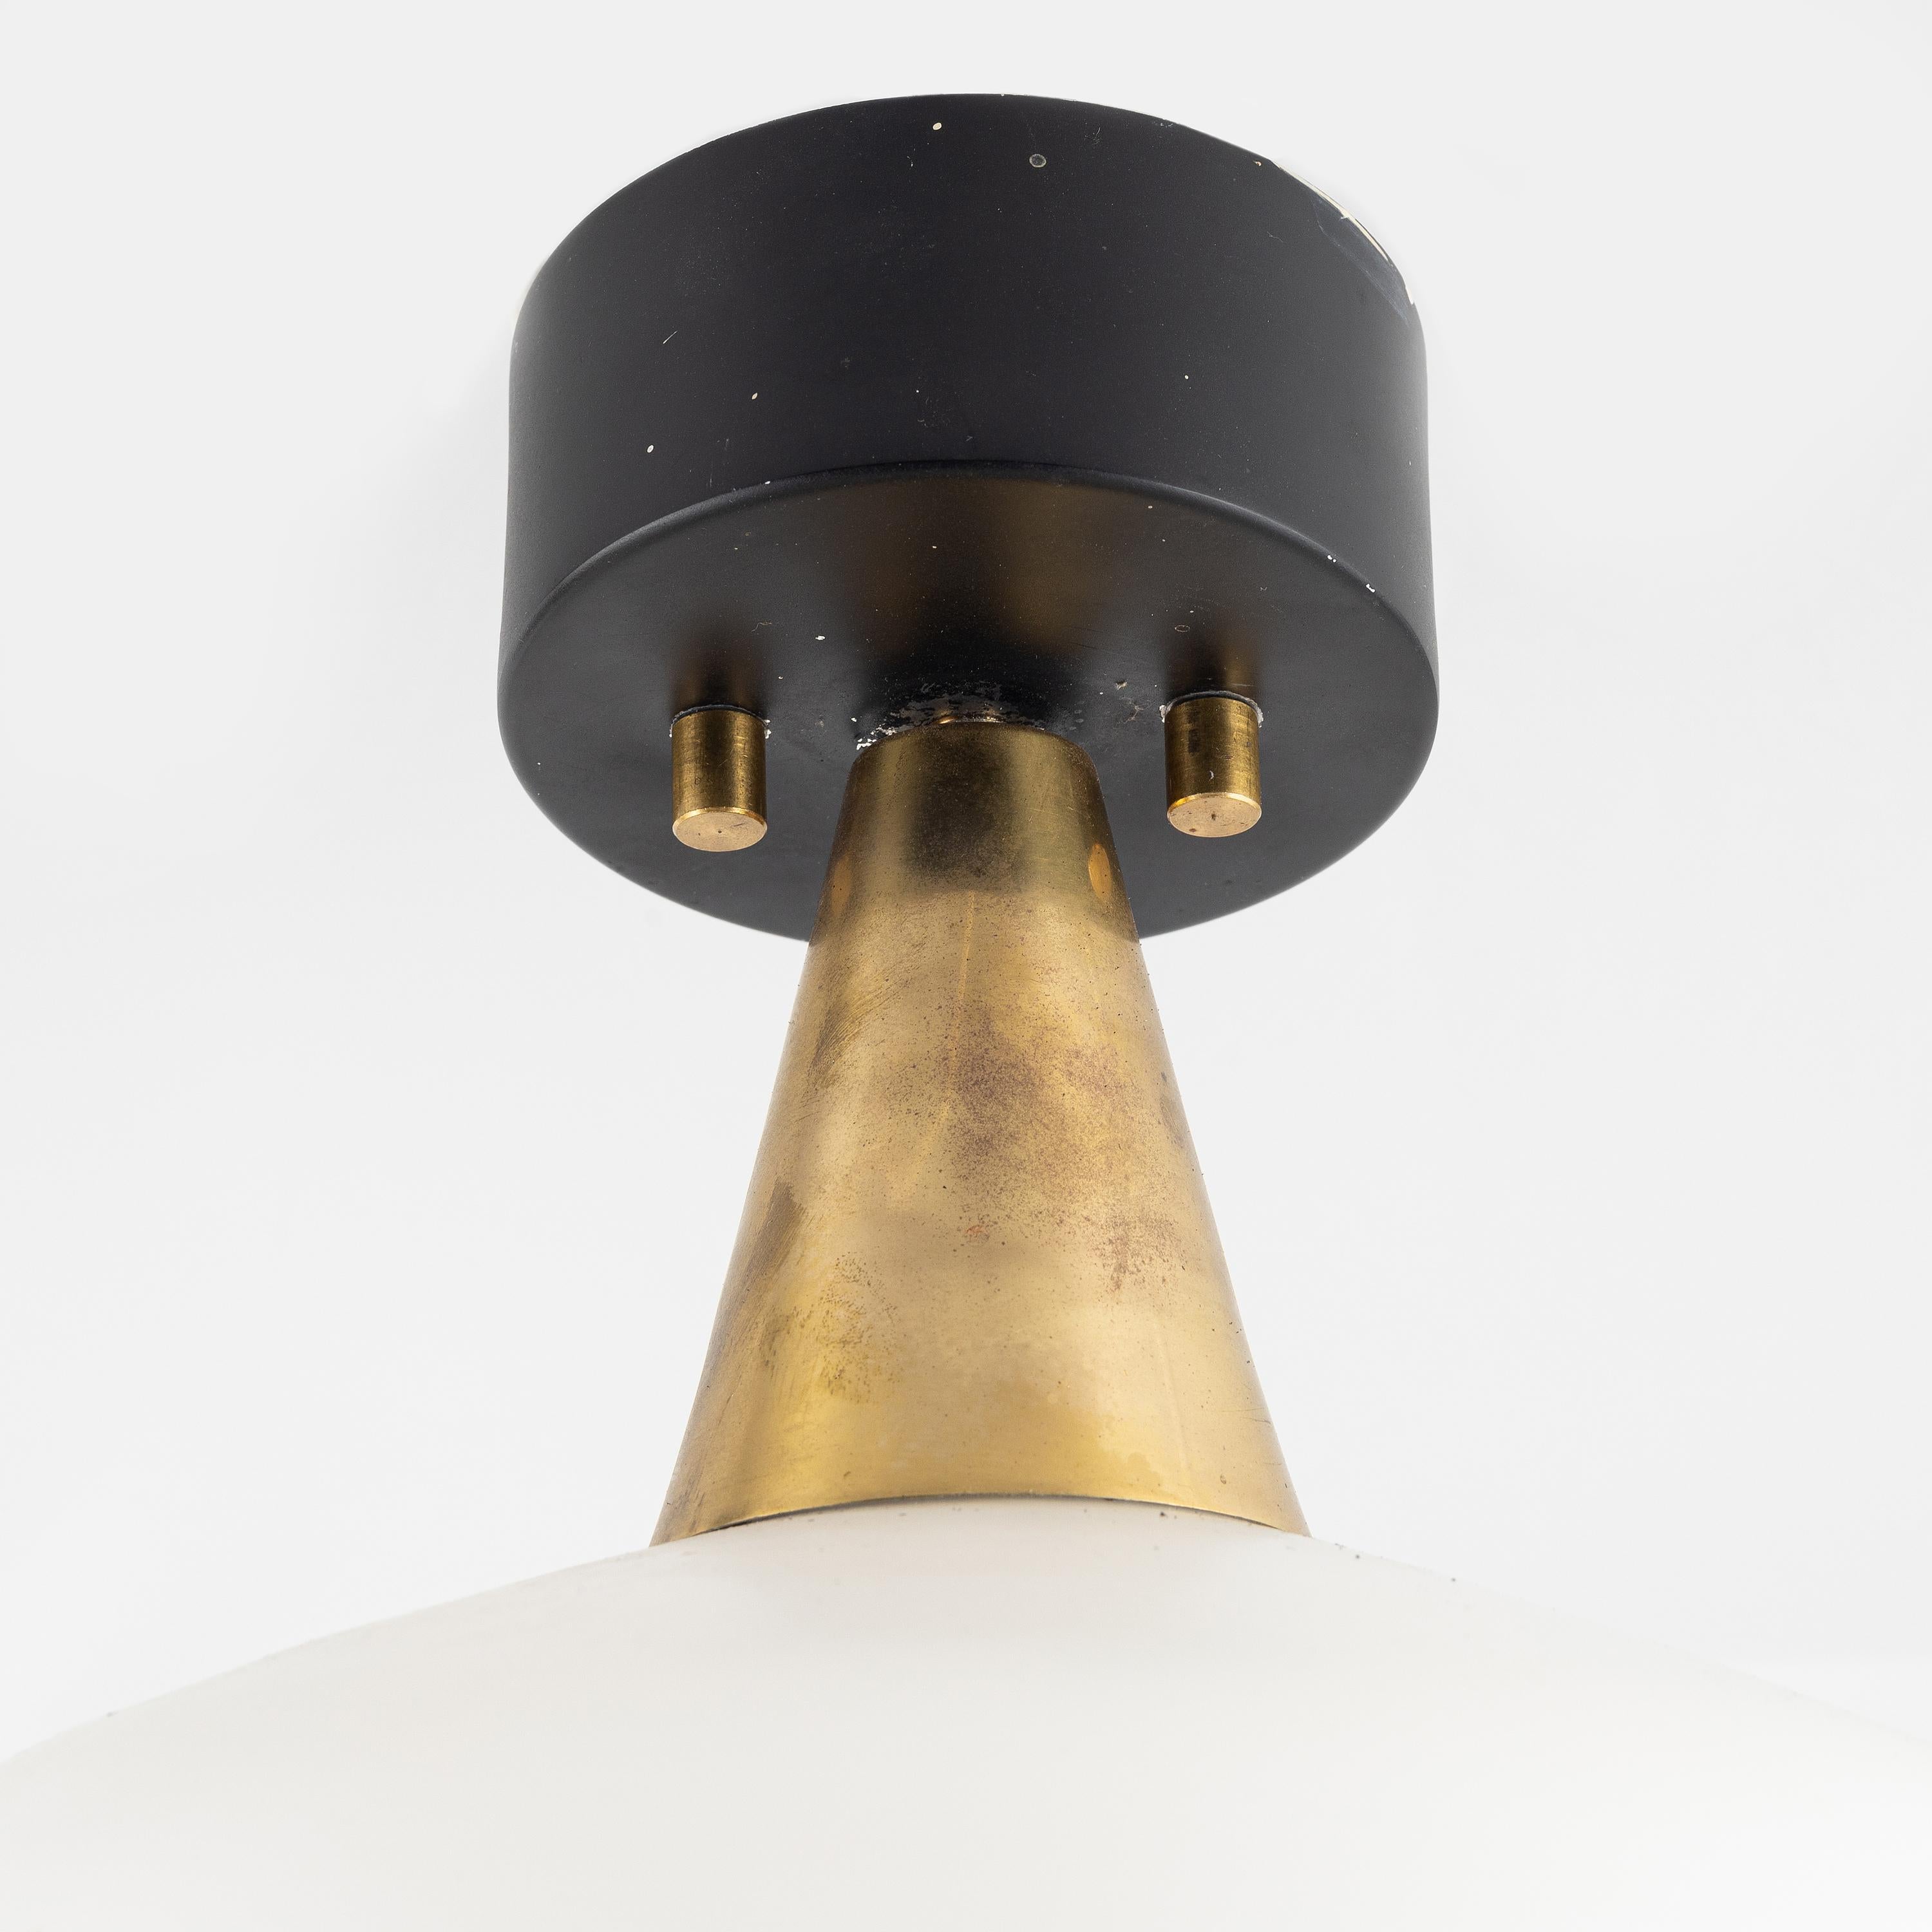 Brass and glass opalin ceiling light in th style of Lisa Johansson-Pape made in Sweden around 1950.
Minor wear, electrical function not tested
A pair available price for 1 item.